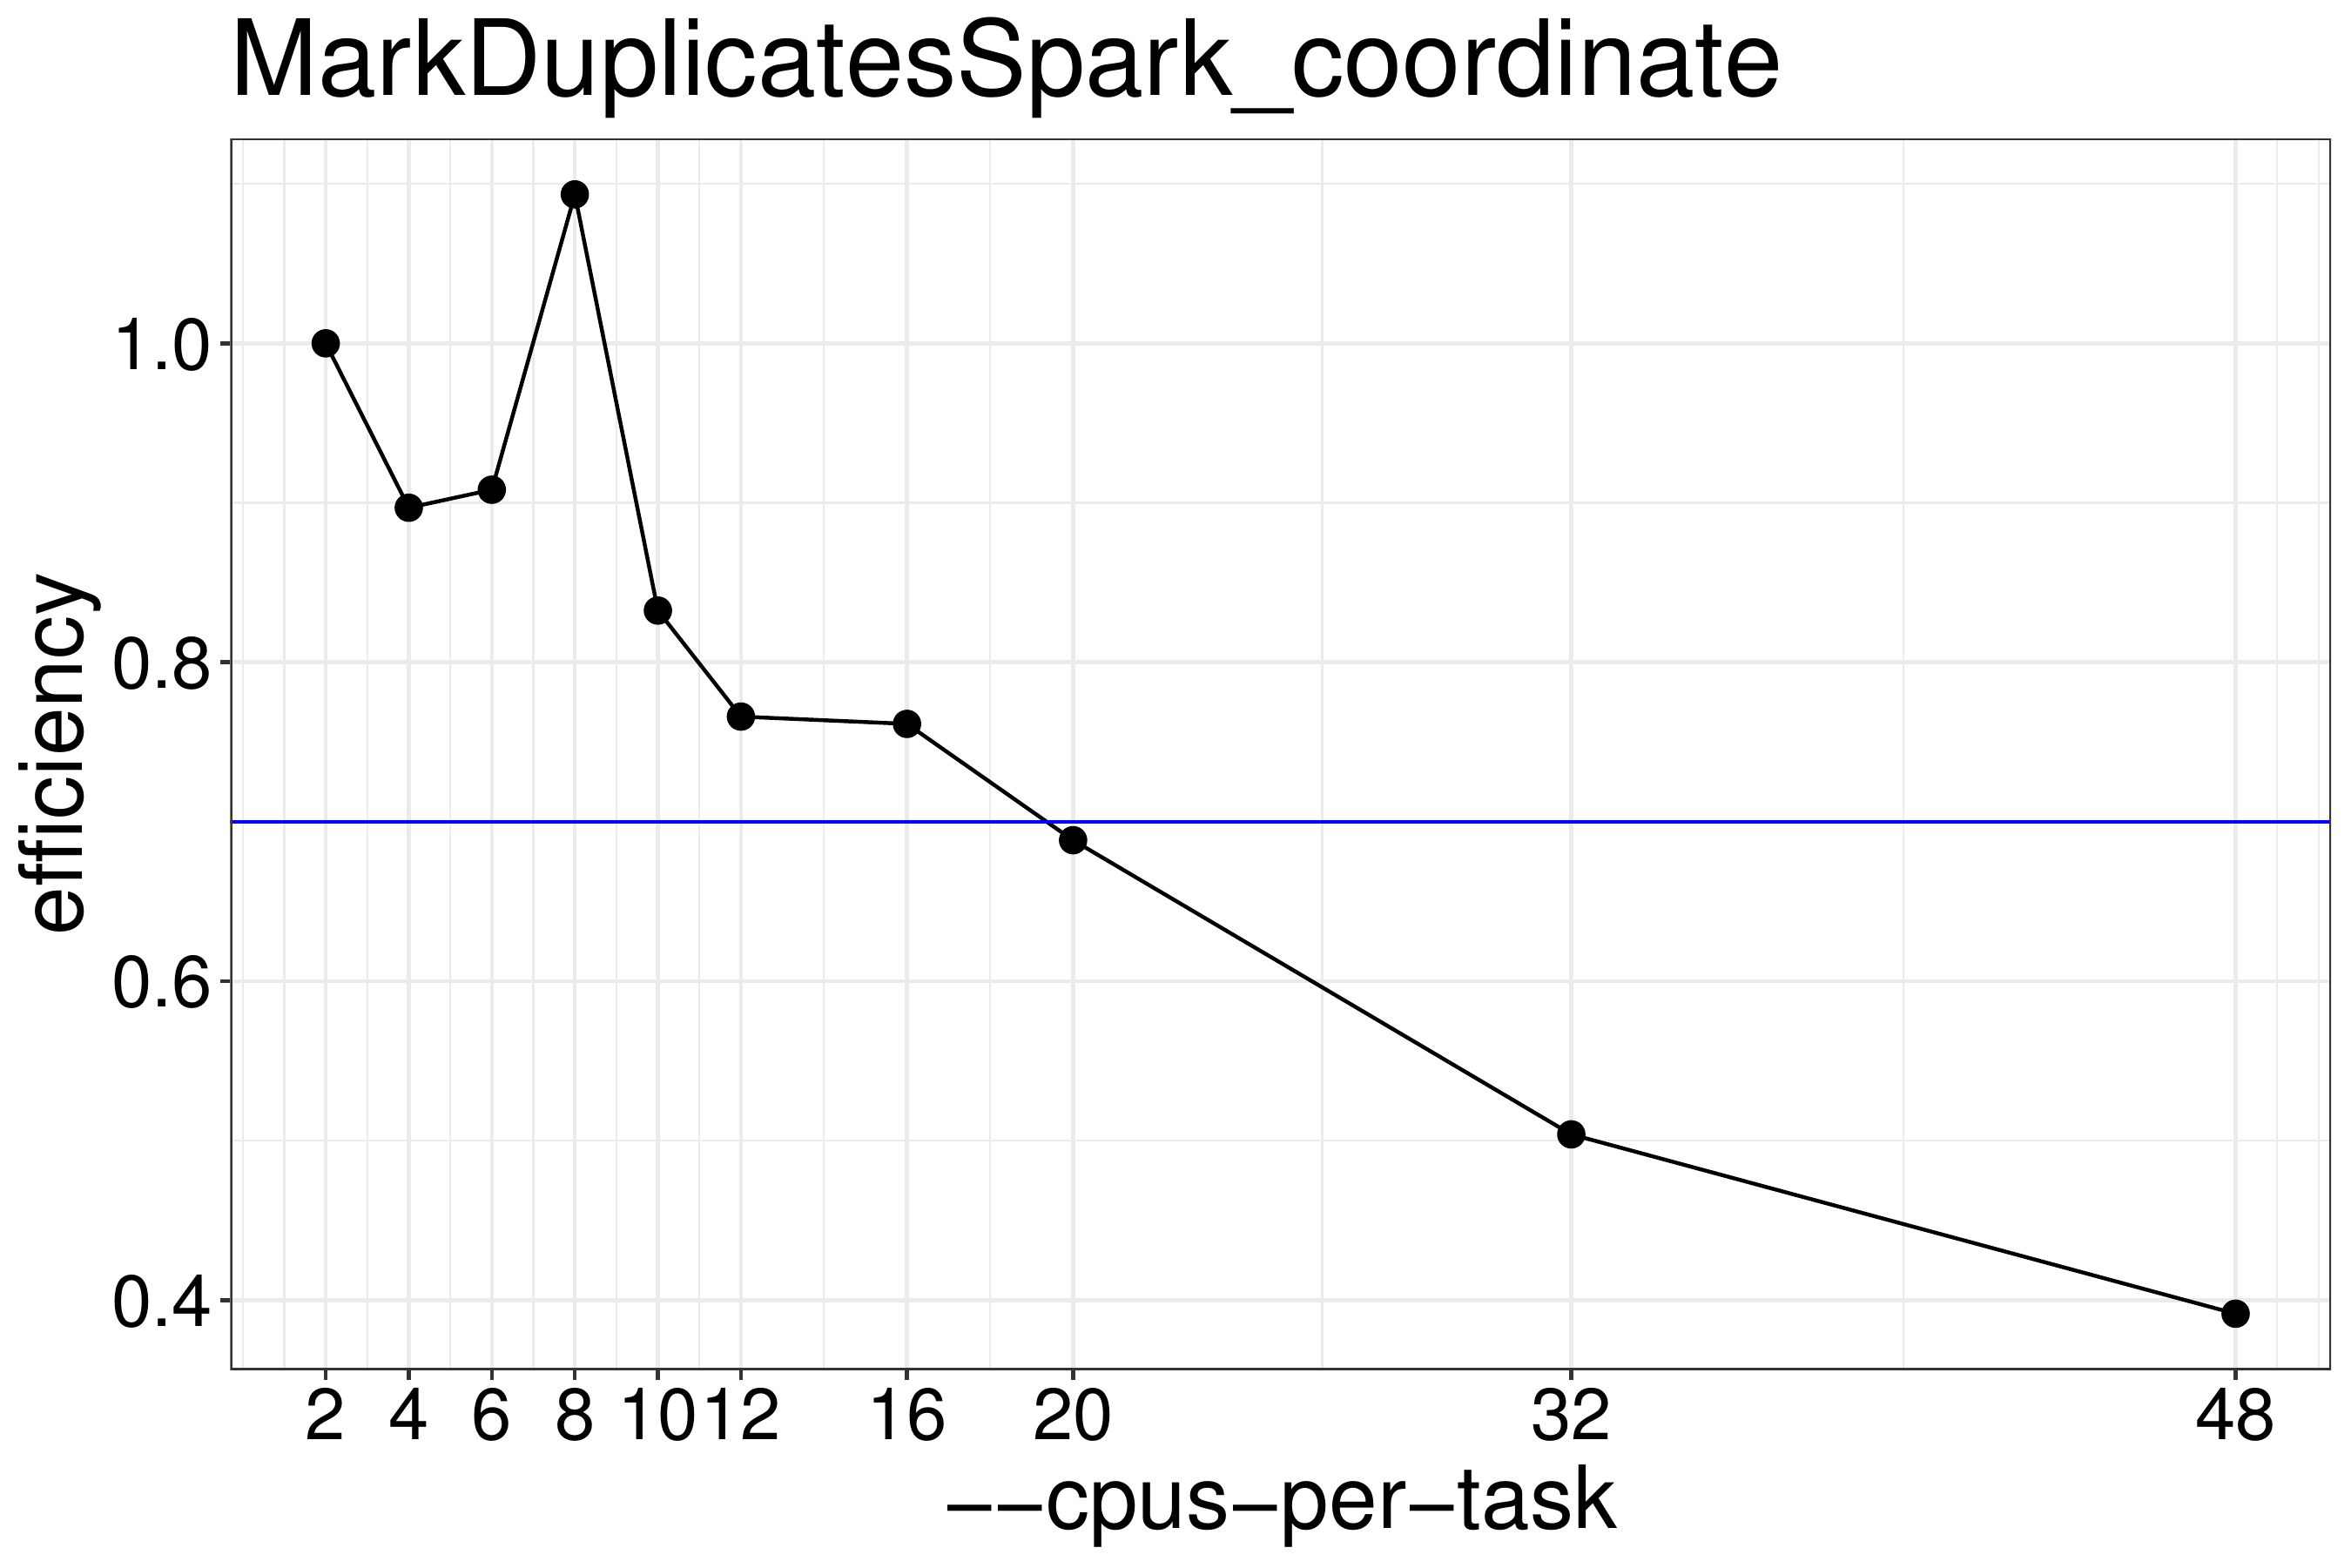 MarkDuplicatesSpark efficiency for coordinate-sorted input data. For good efficiency no more than 16 threads should be run.